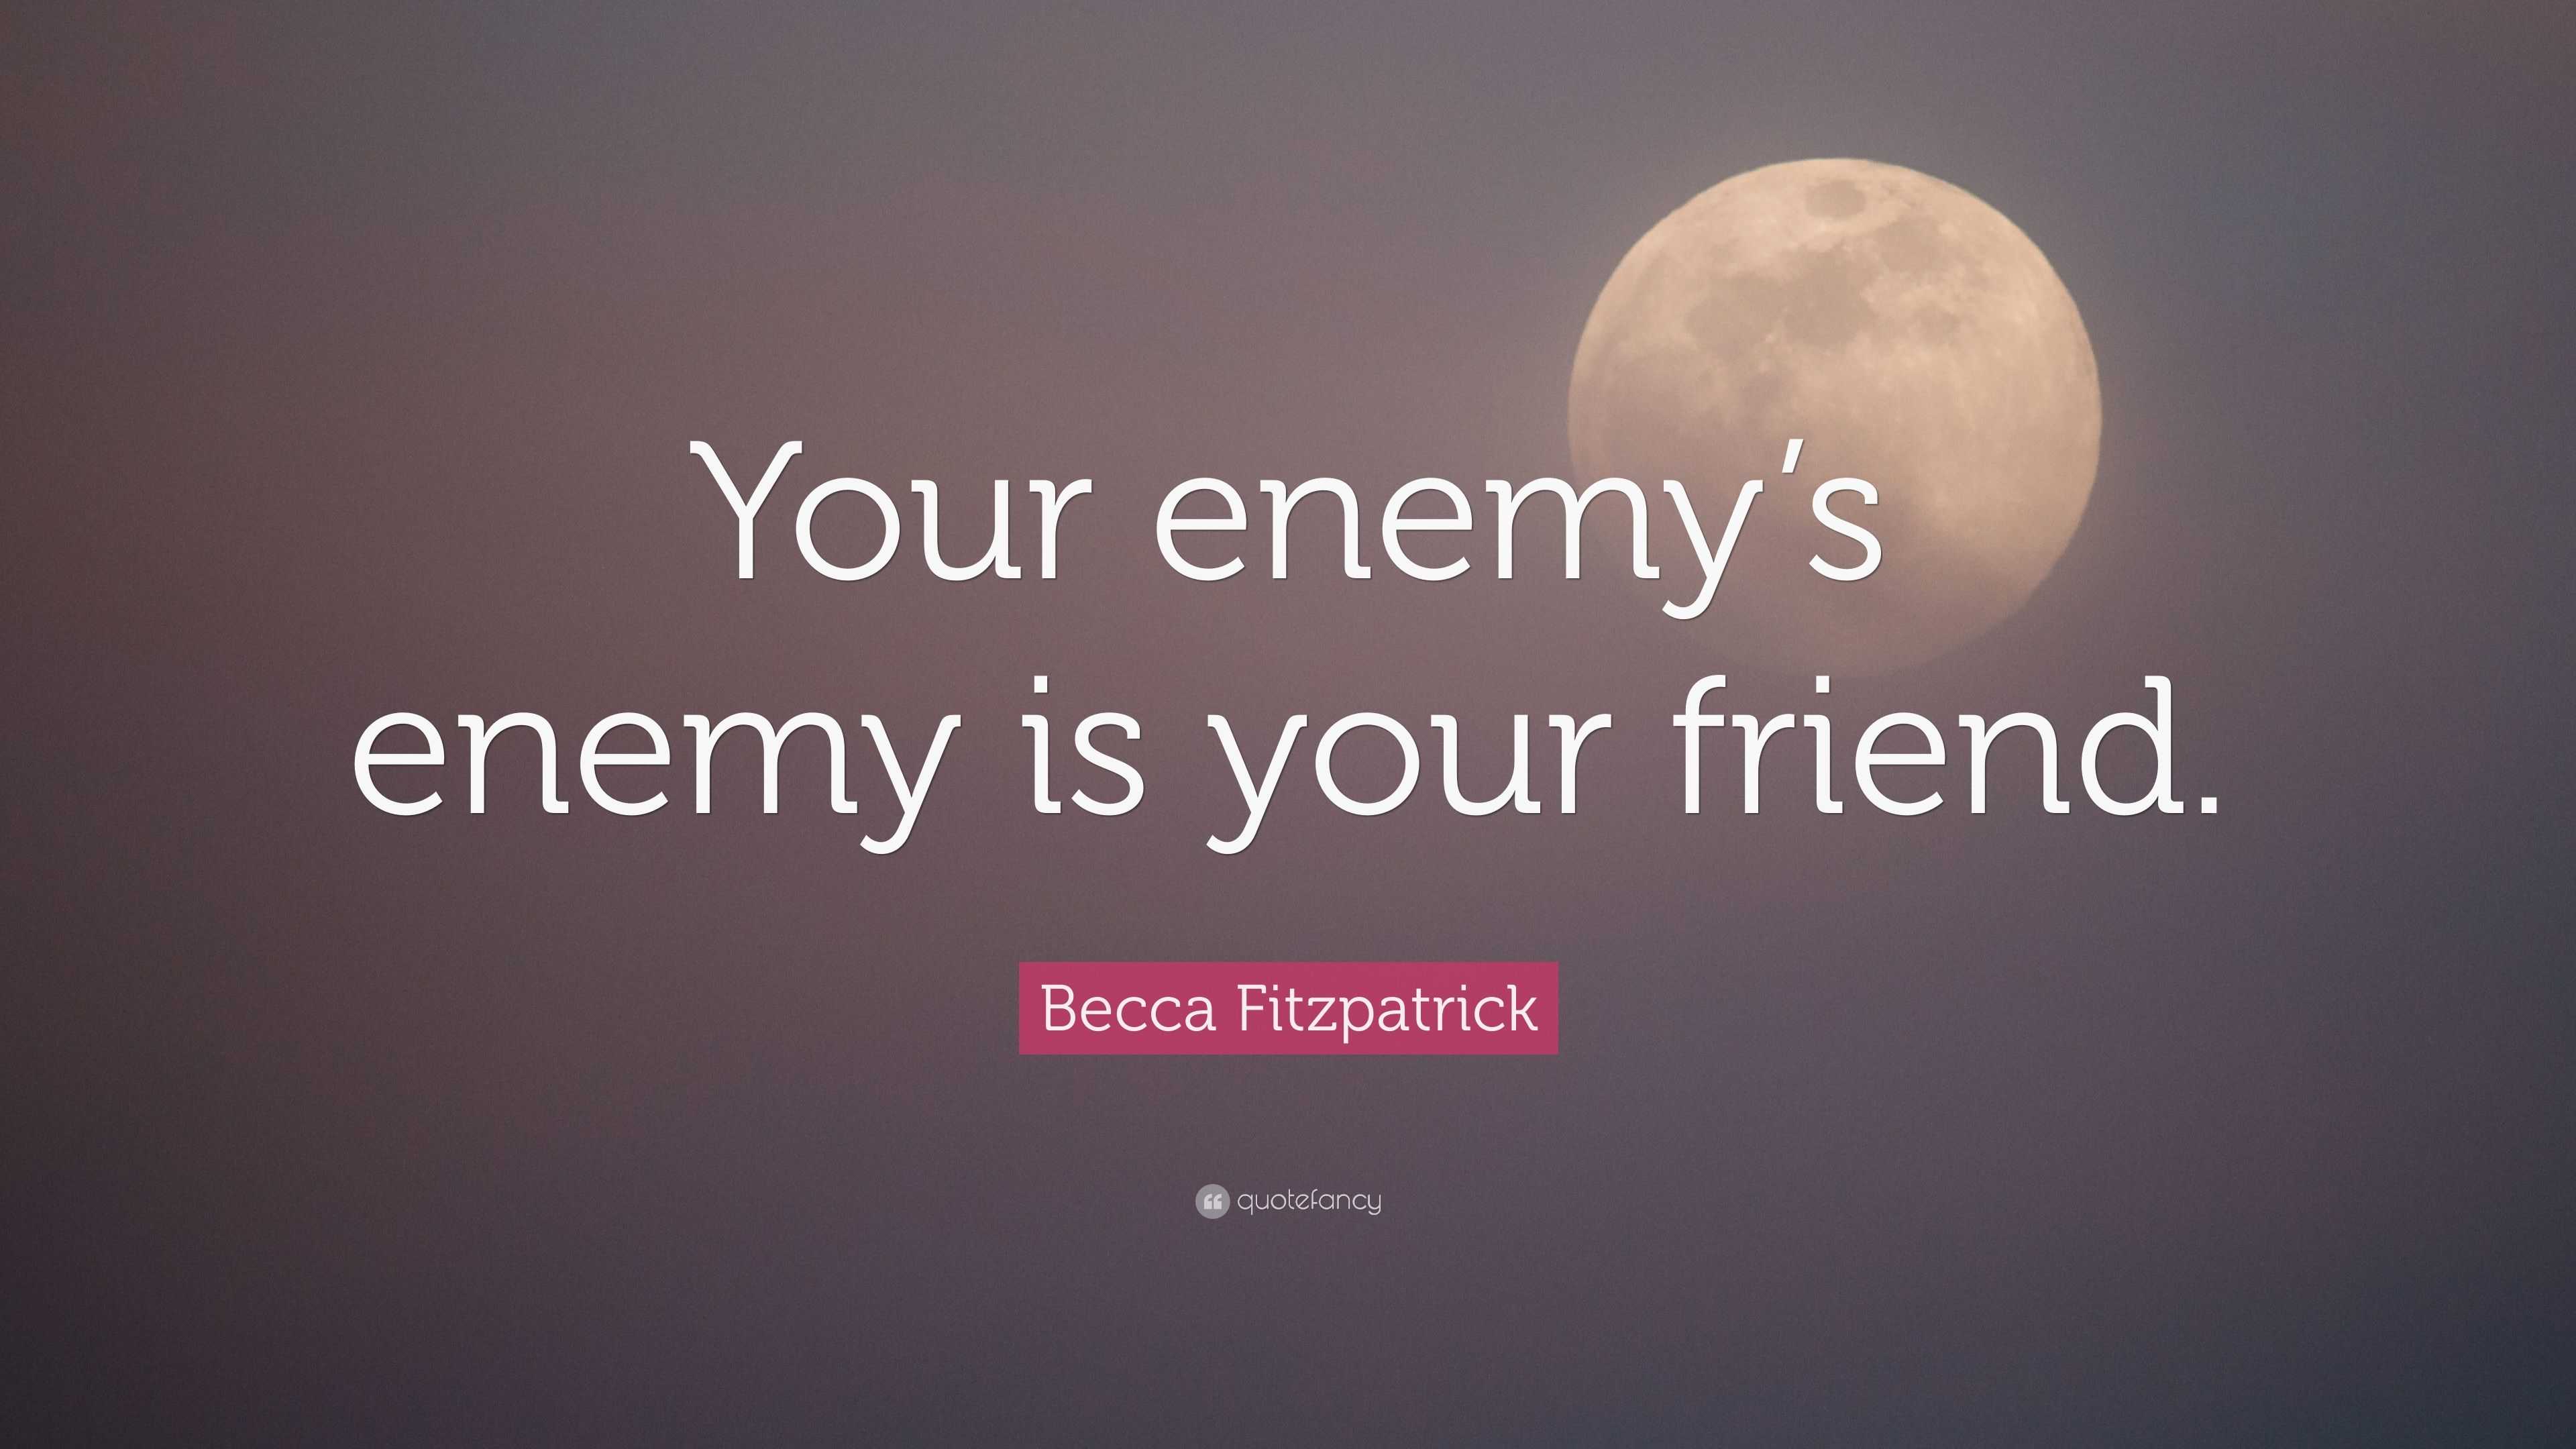 Becca Fitzpatrick Quote: “Your enemy’s enemy is your friend.”